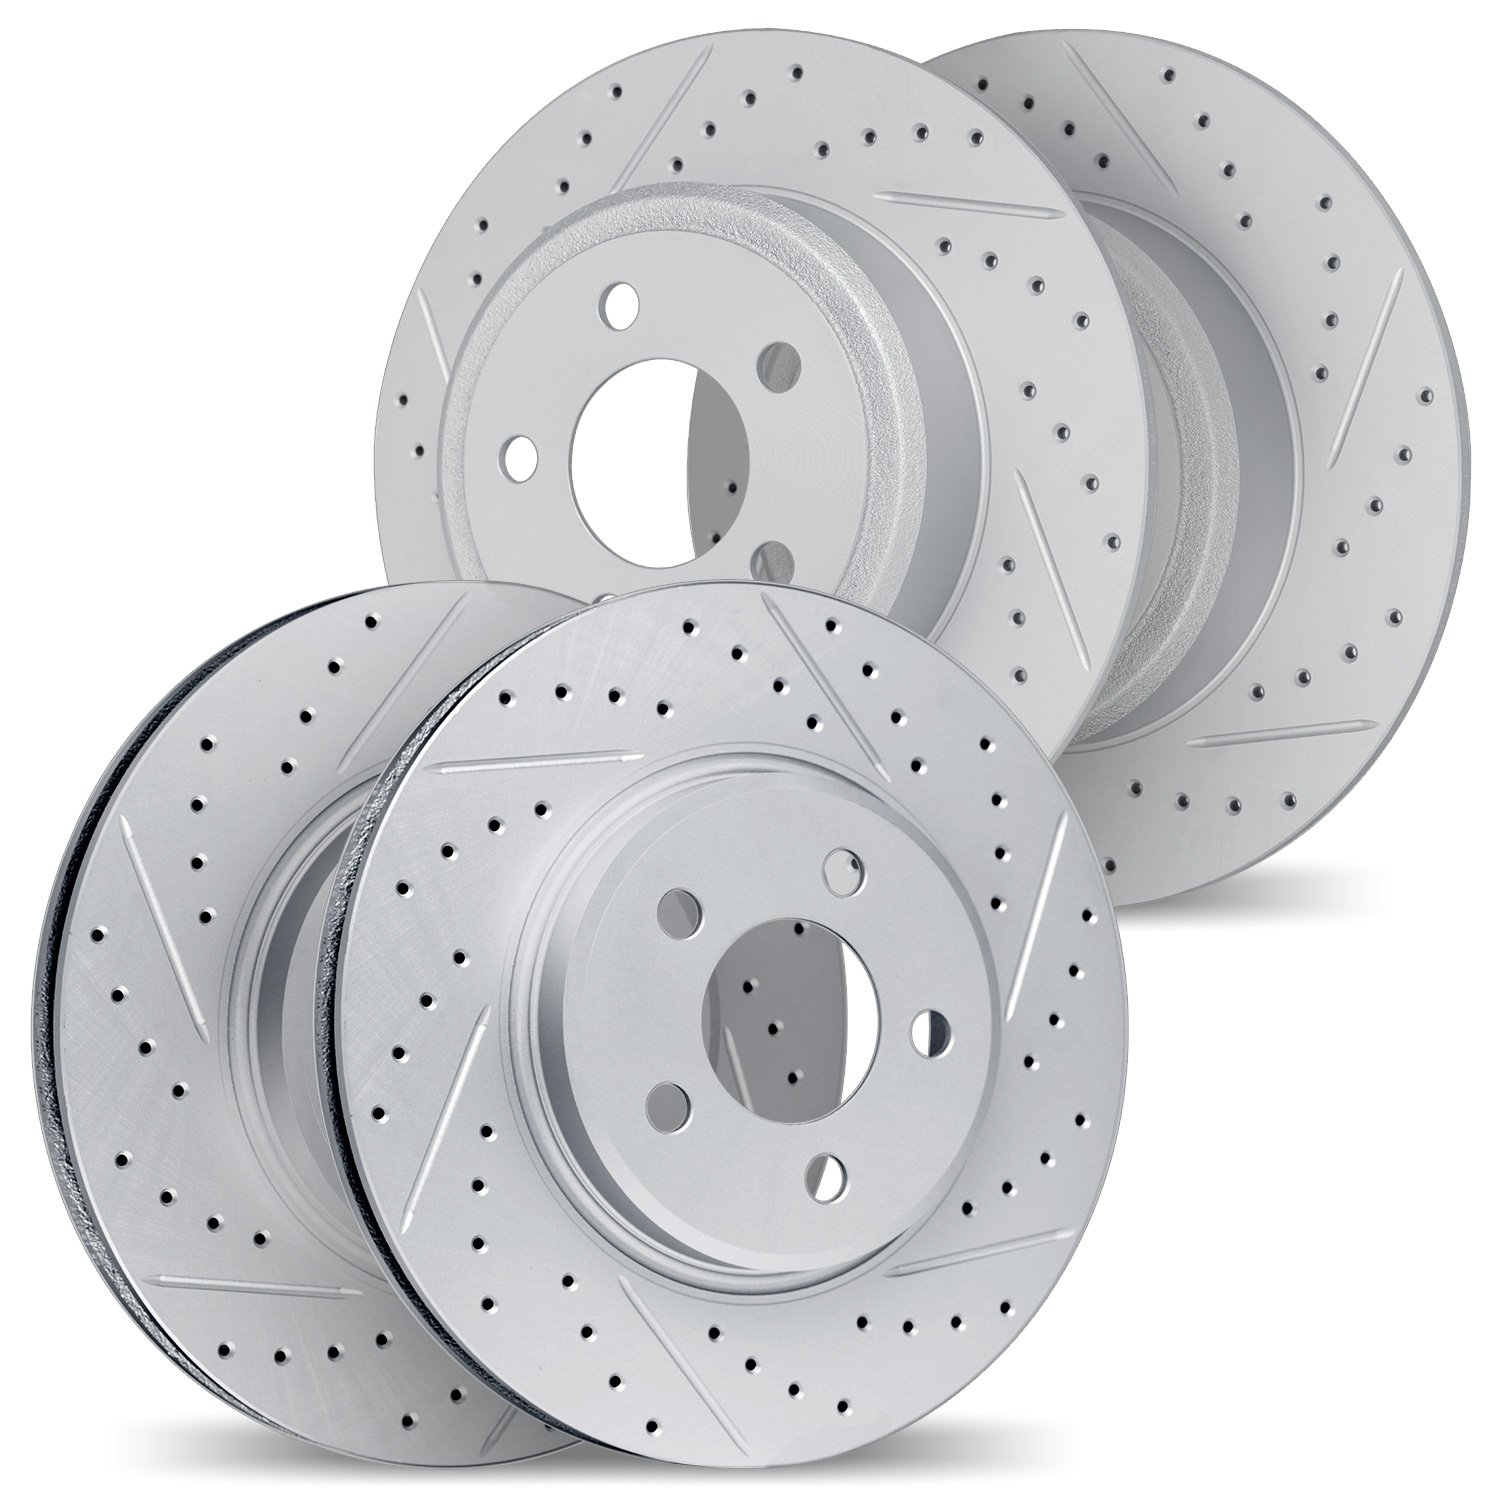 2004-80019 Geoperformance Drilled/Slotted Brake Rotors, 2016-2018 Ford/Lincoln/Mercury/Mazda, Position: Front and Rear